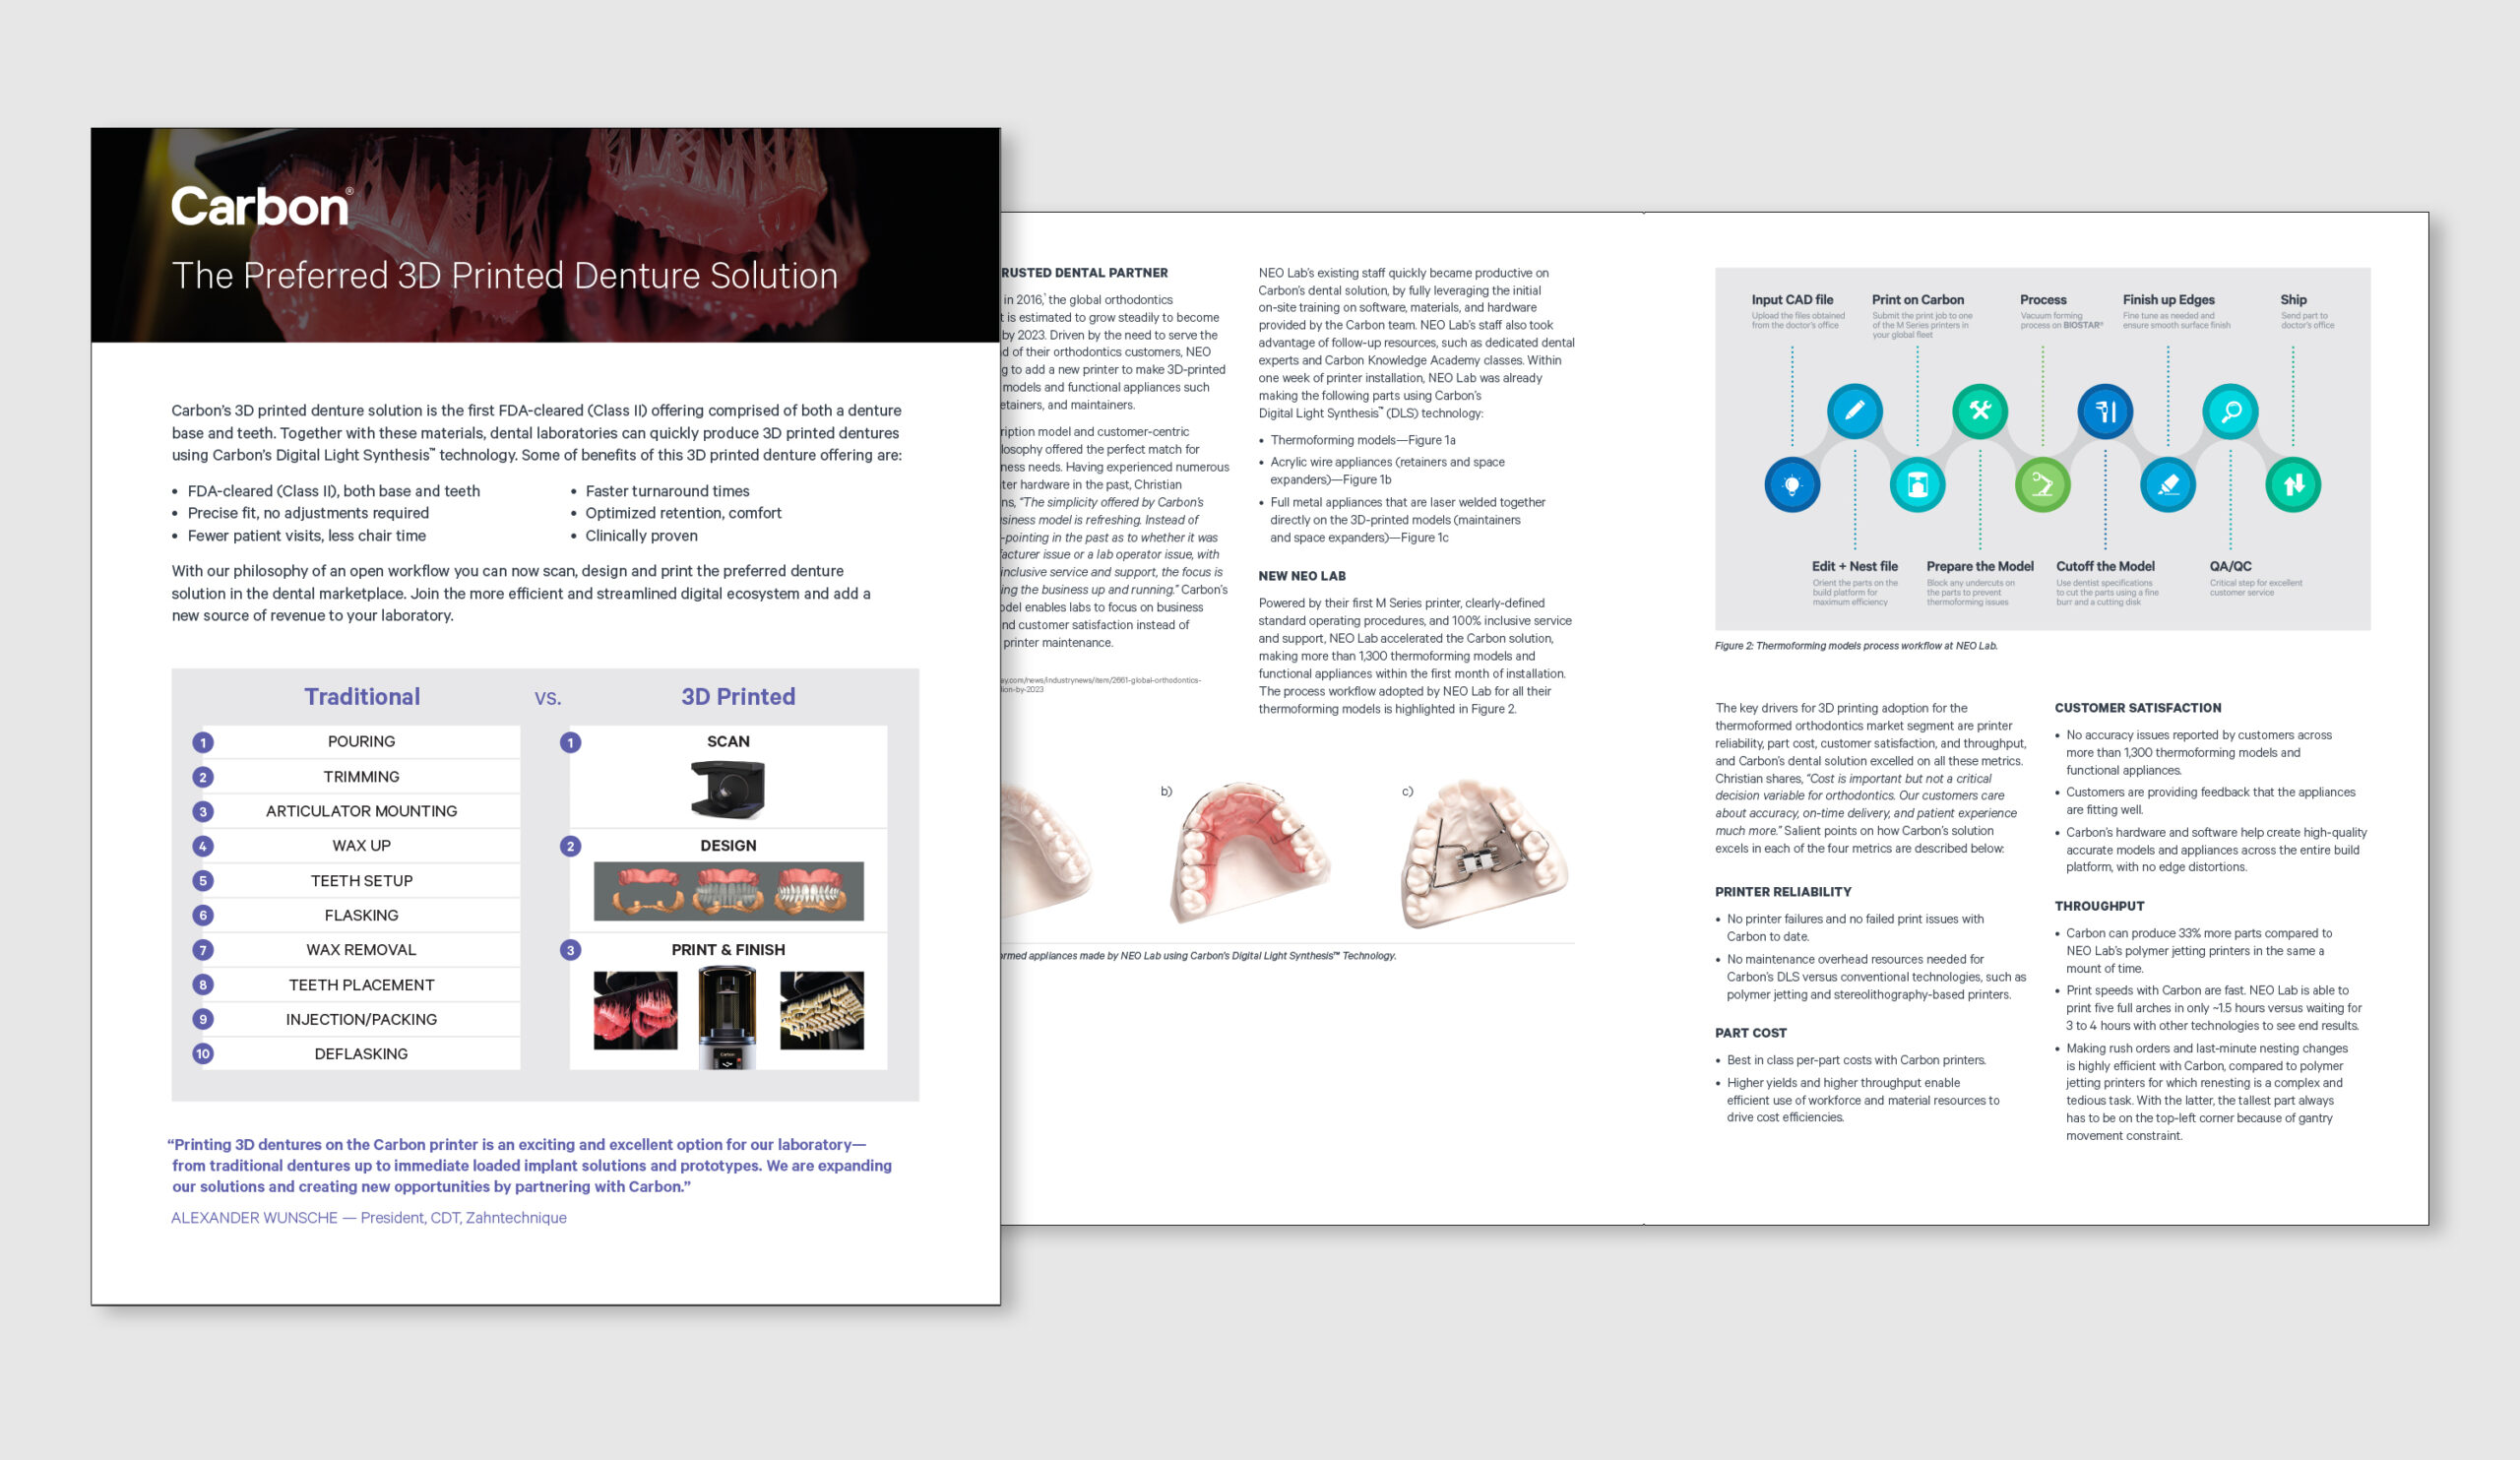 3D printing is revolutionizing the dental industry. This white paper promoted how they were helping dentists evolve their practices.